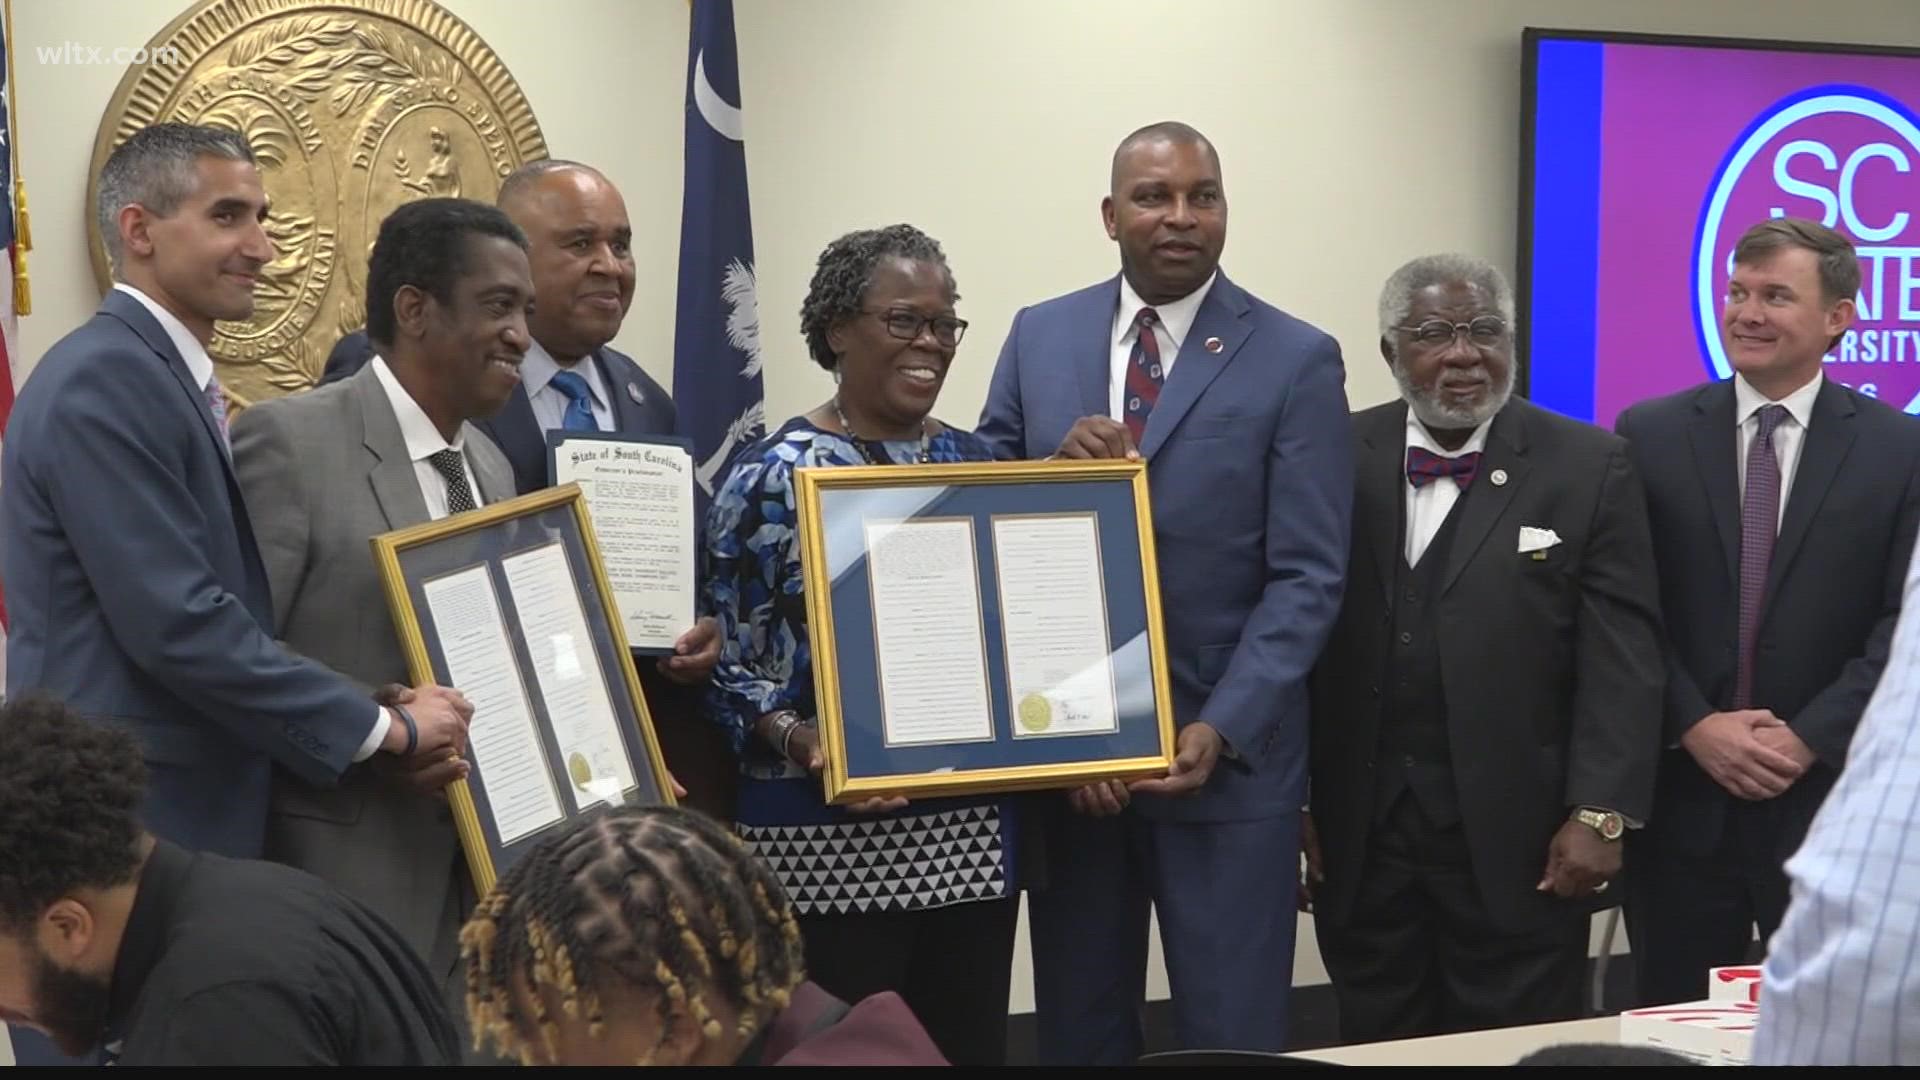 It was to honor the school's football team for winning the HBCU National Championship.